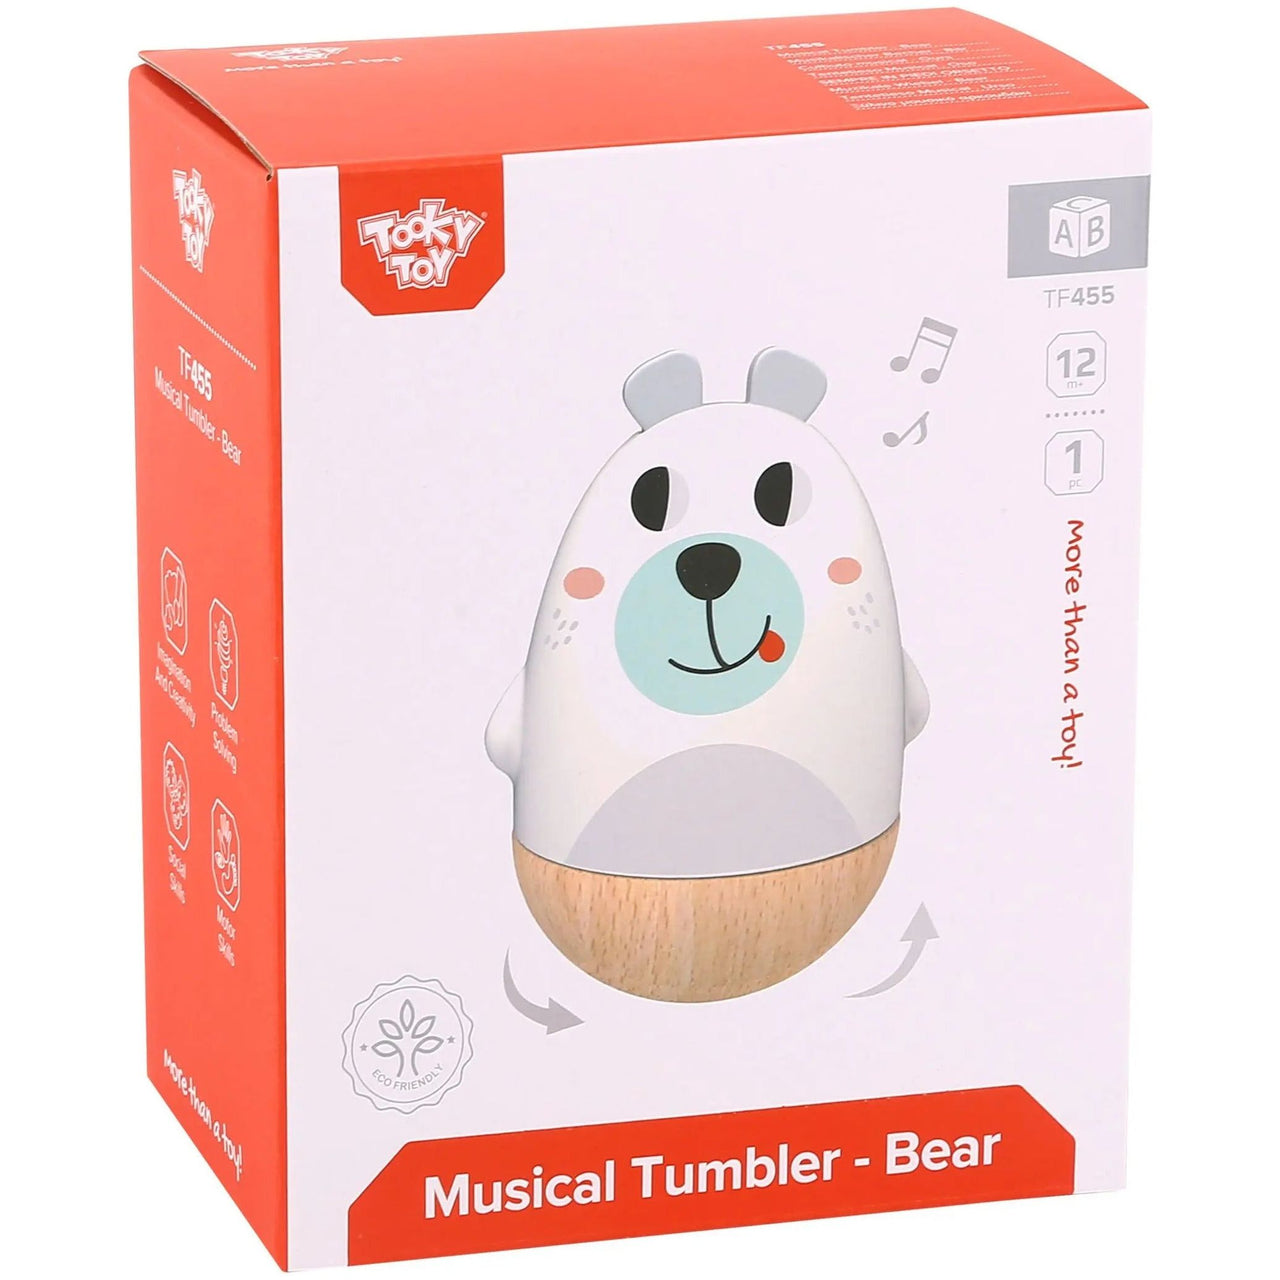 Tooky Toy Wooden Bear Musical Tumbler Tooky Toy